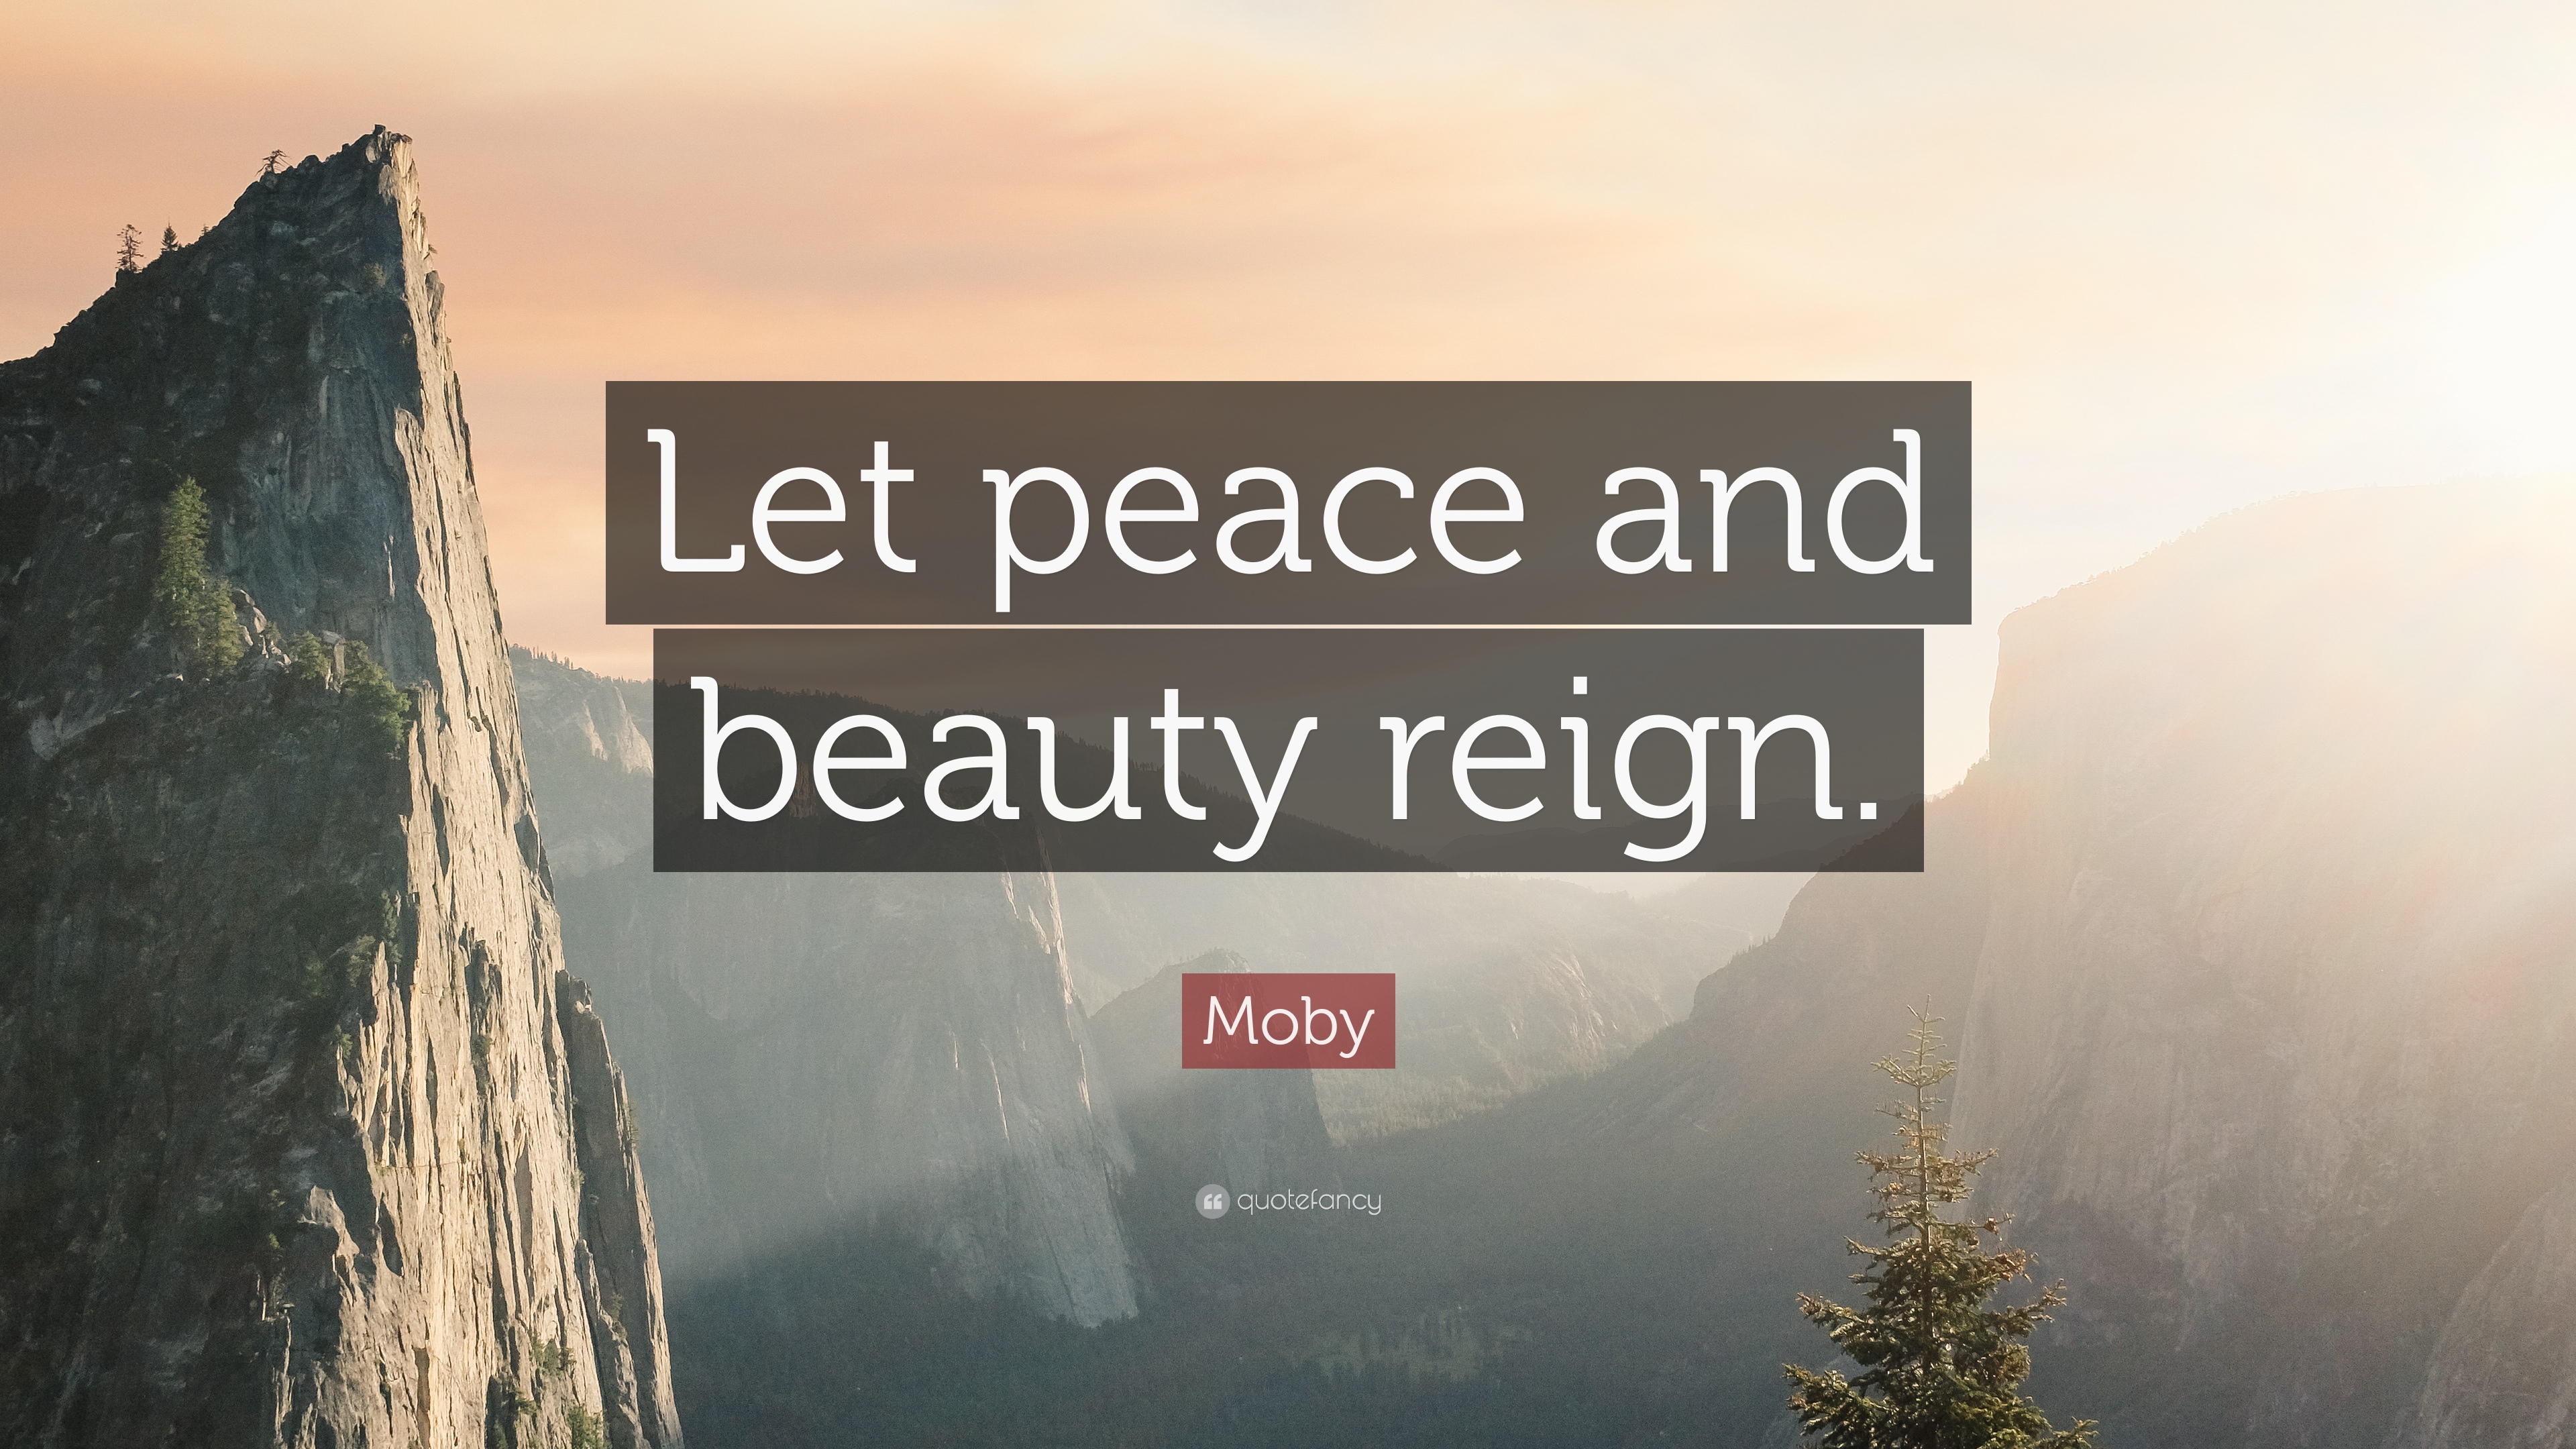 Moby Quote: “Let peace and beauty reign.” (7 wallpaper)